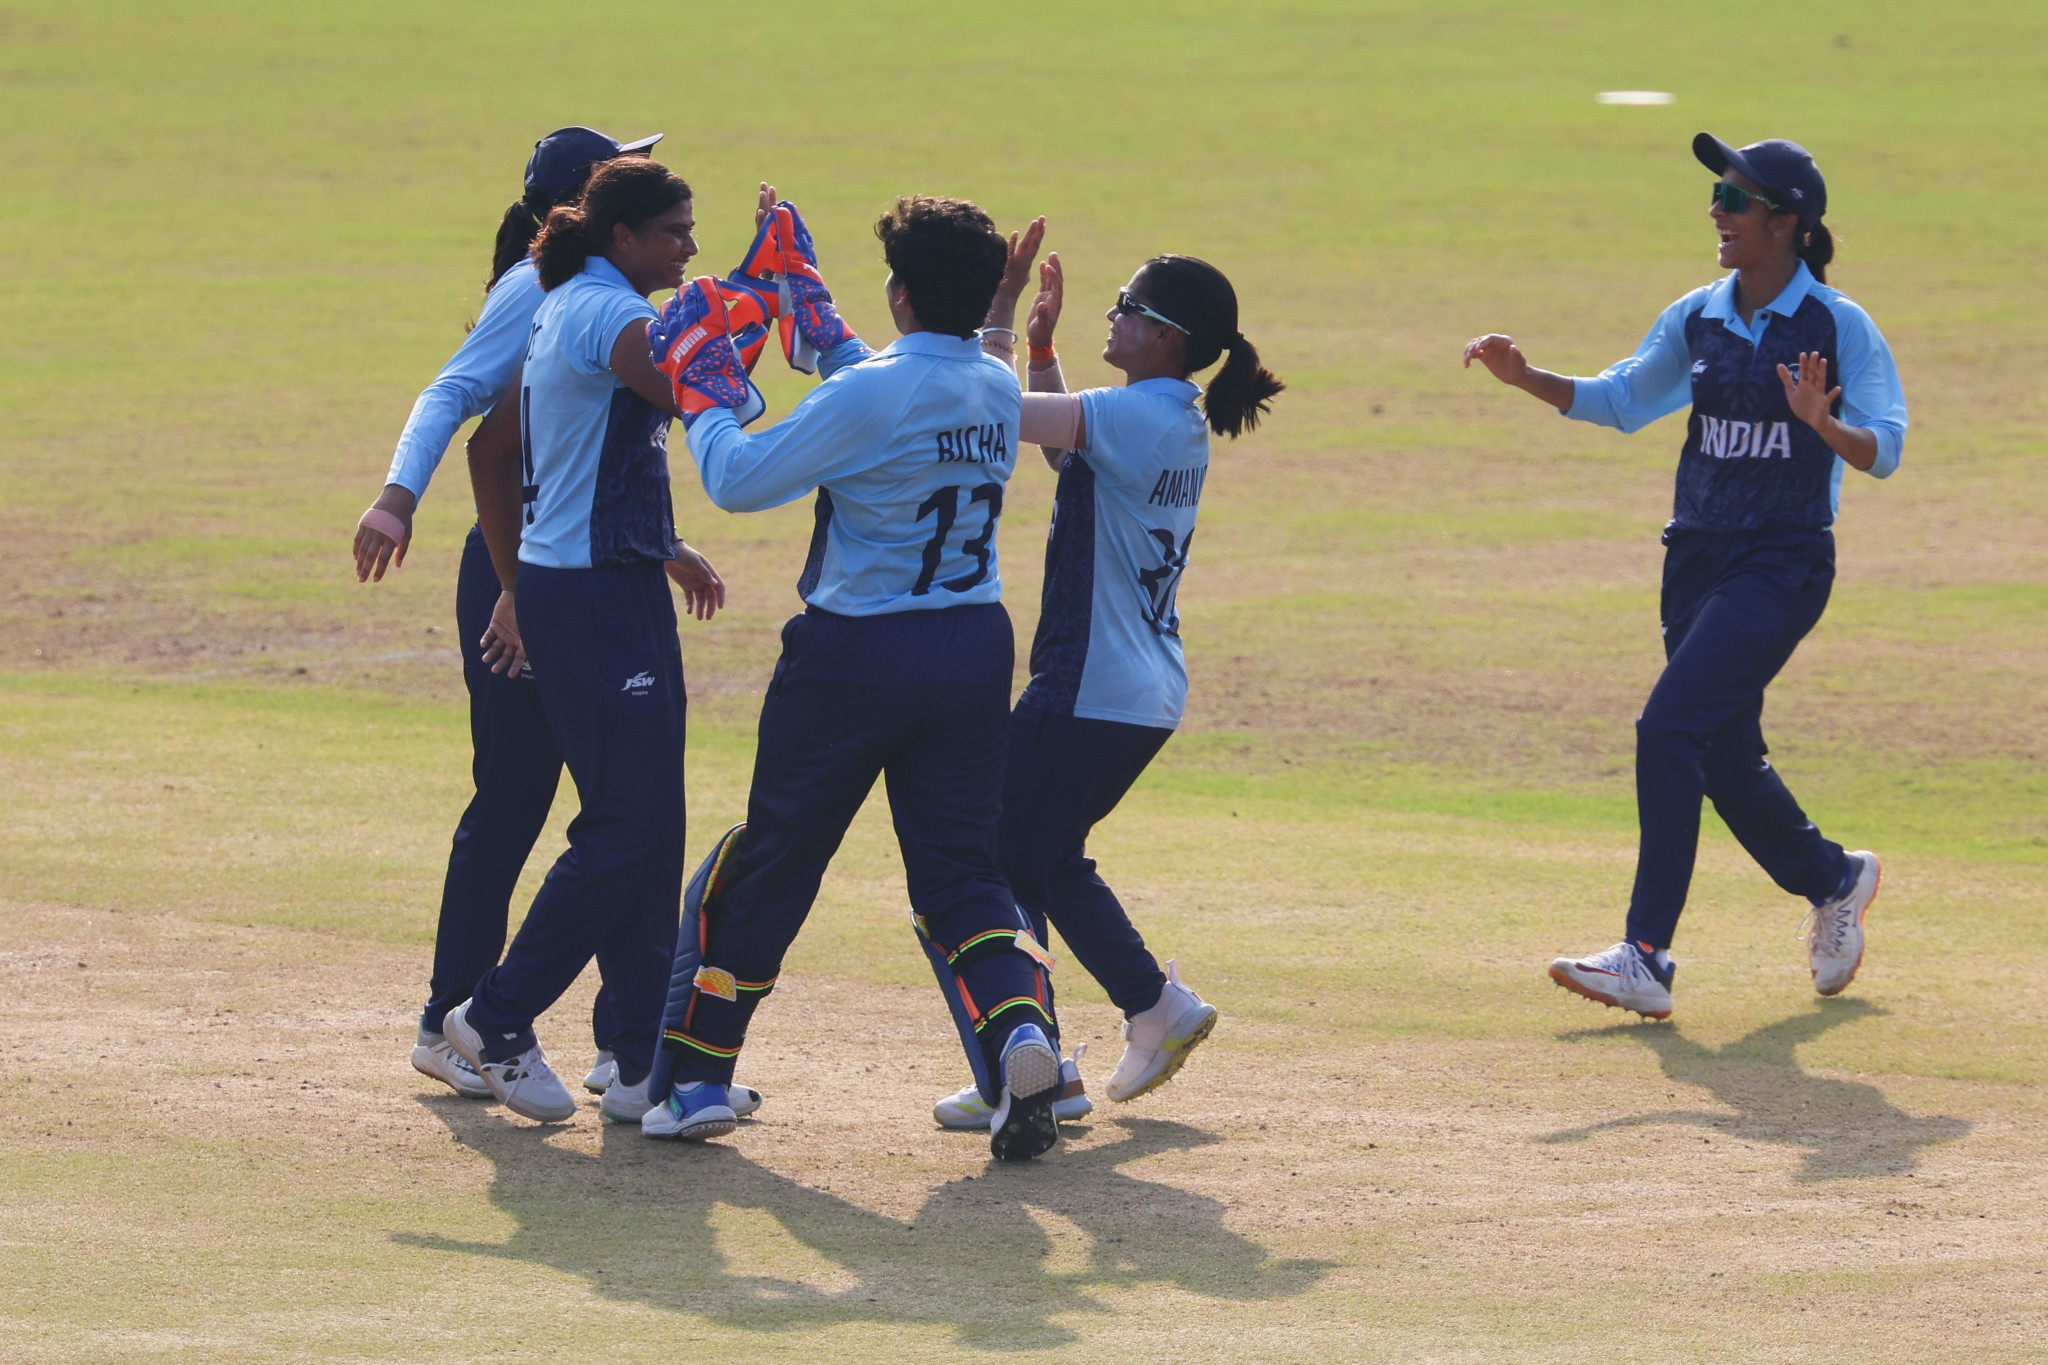 India claimed a 19-run victory over Sri Lanka in the women's cricket final ©Getty Images